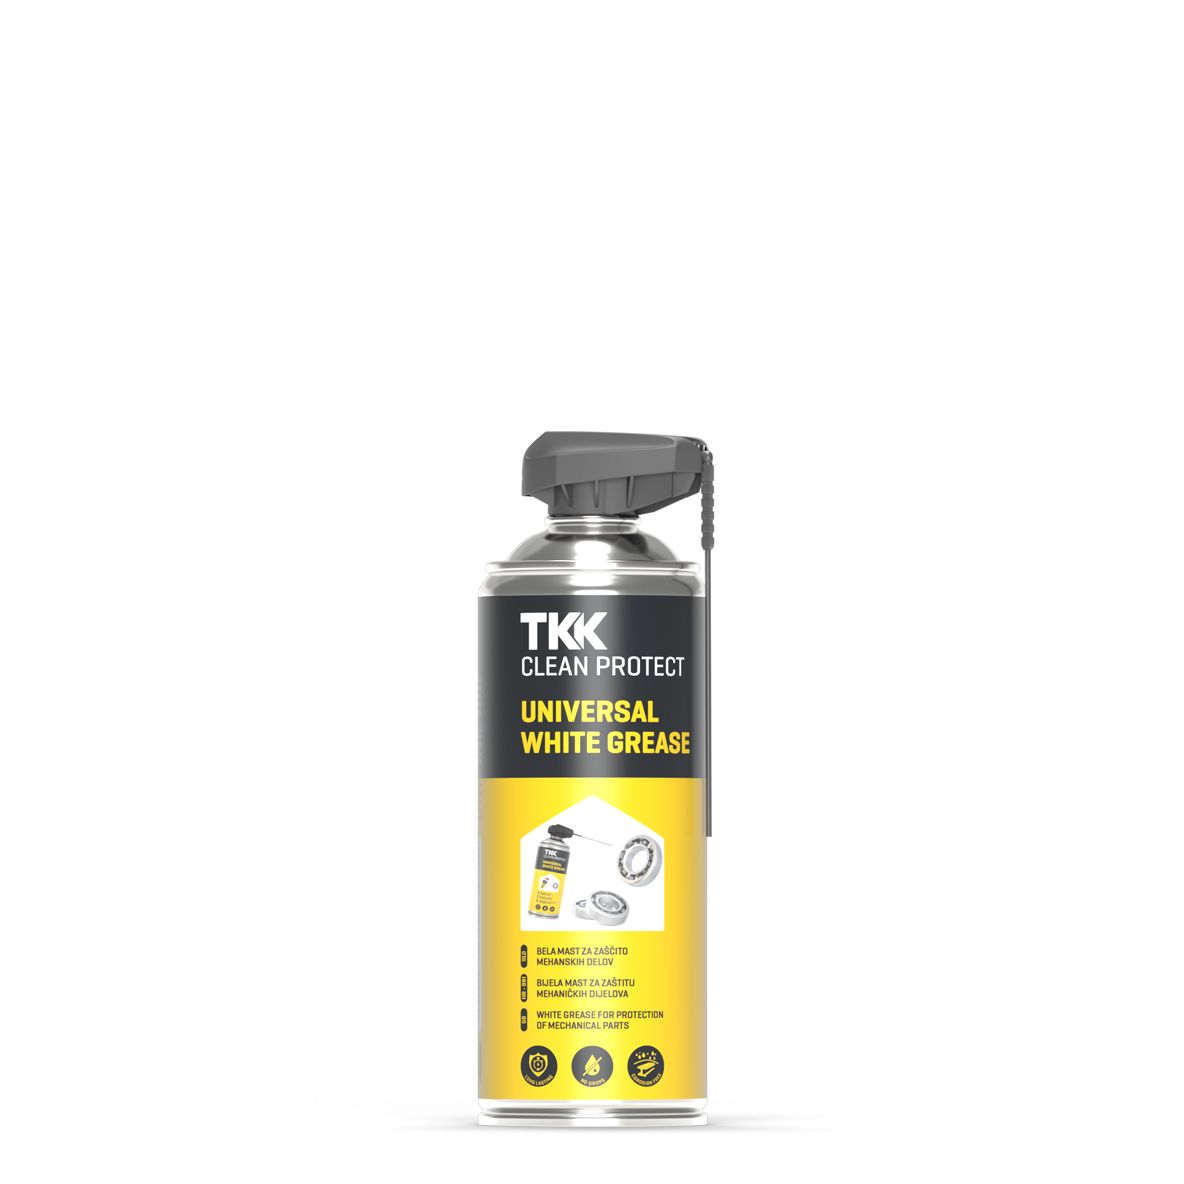 TKK Clean Protect Universal White Grease